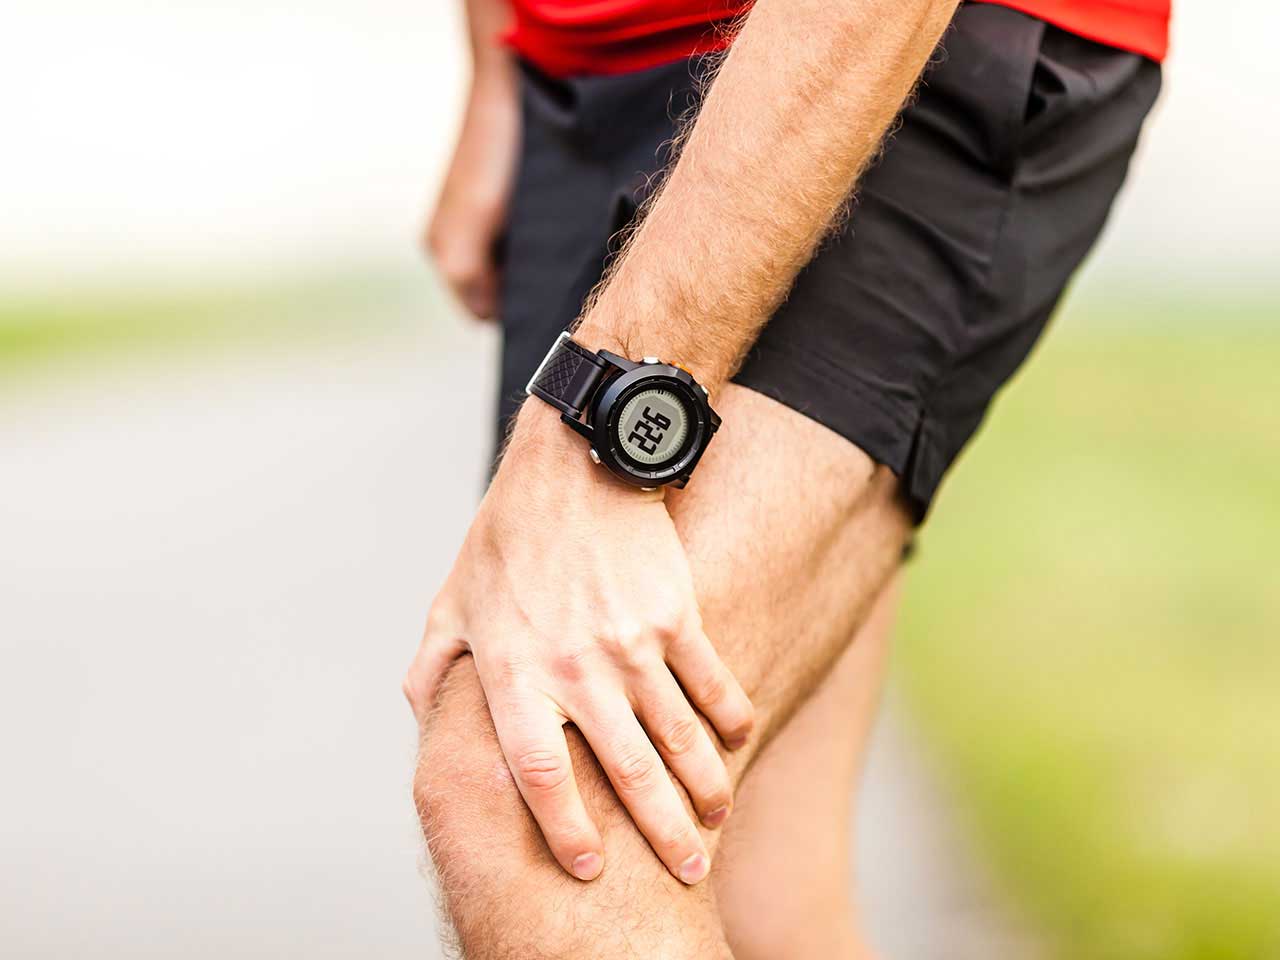 Male runner holding knee for pain relief